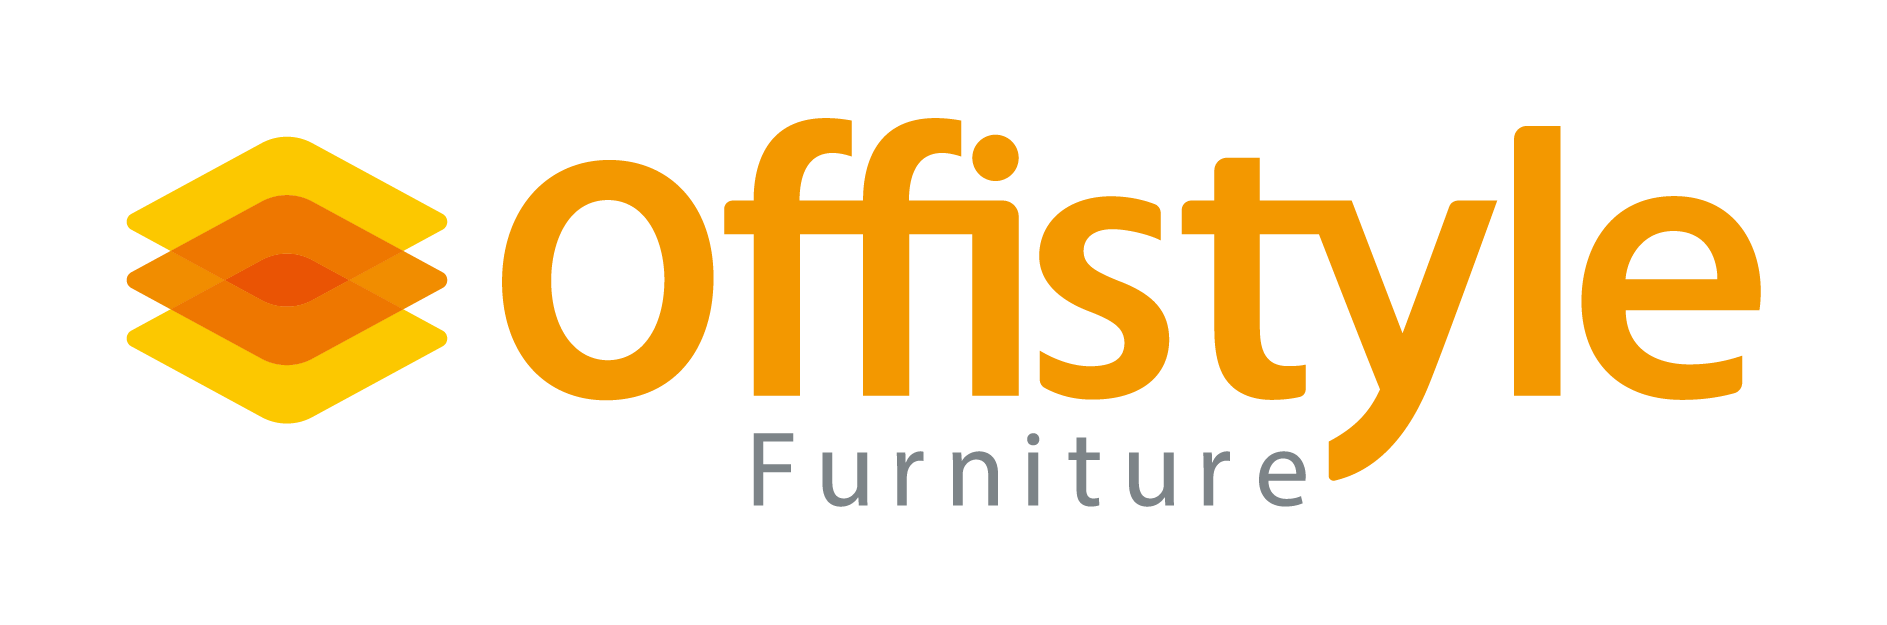 Changzhou Offistyle Furniture Co., Ltd.